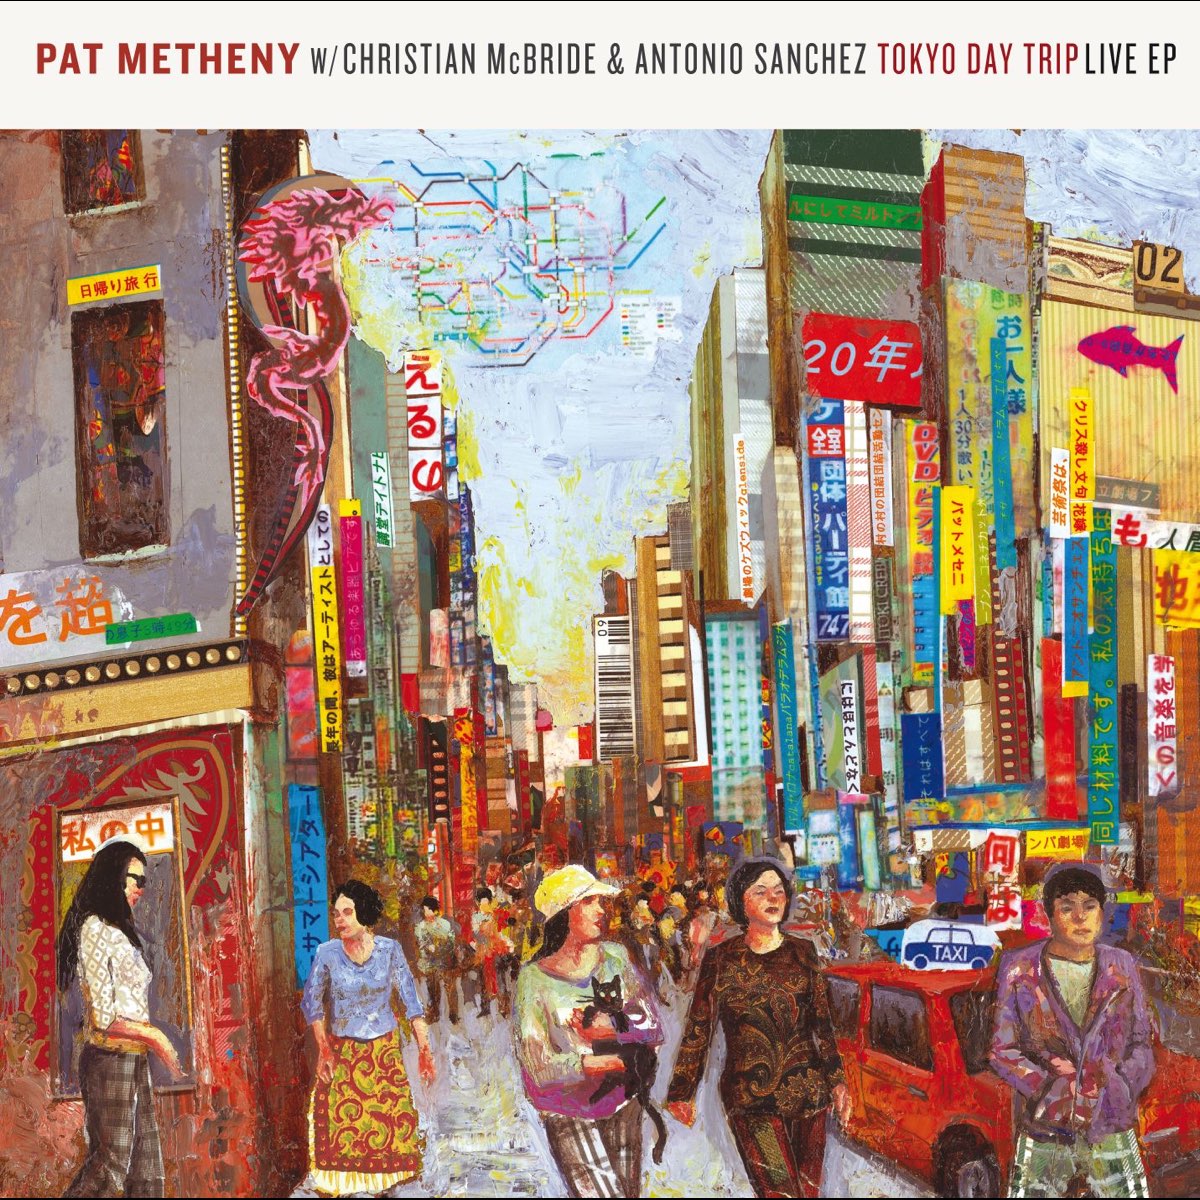 Pat live. Картина масляная Токио. Travels Pat Metheny. Tokio Day. Обложка Live is a trip.